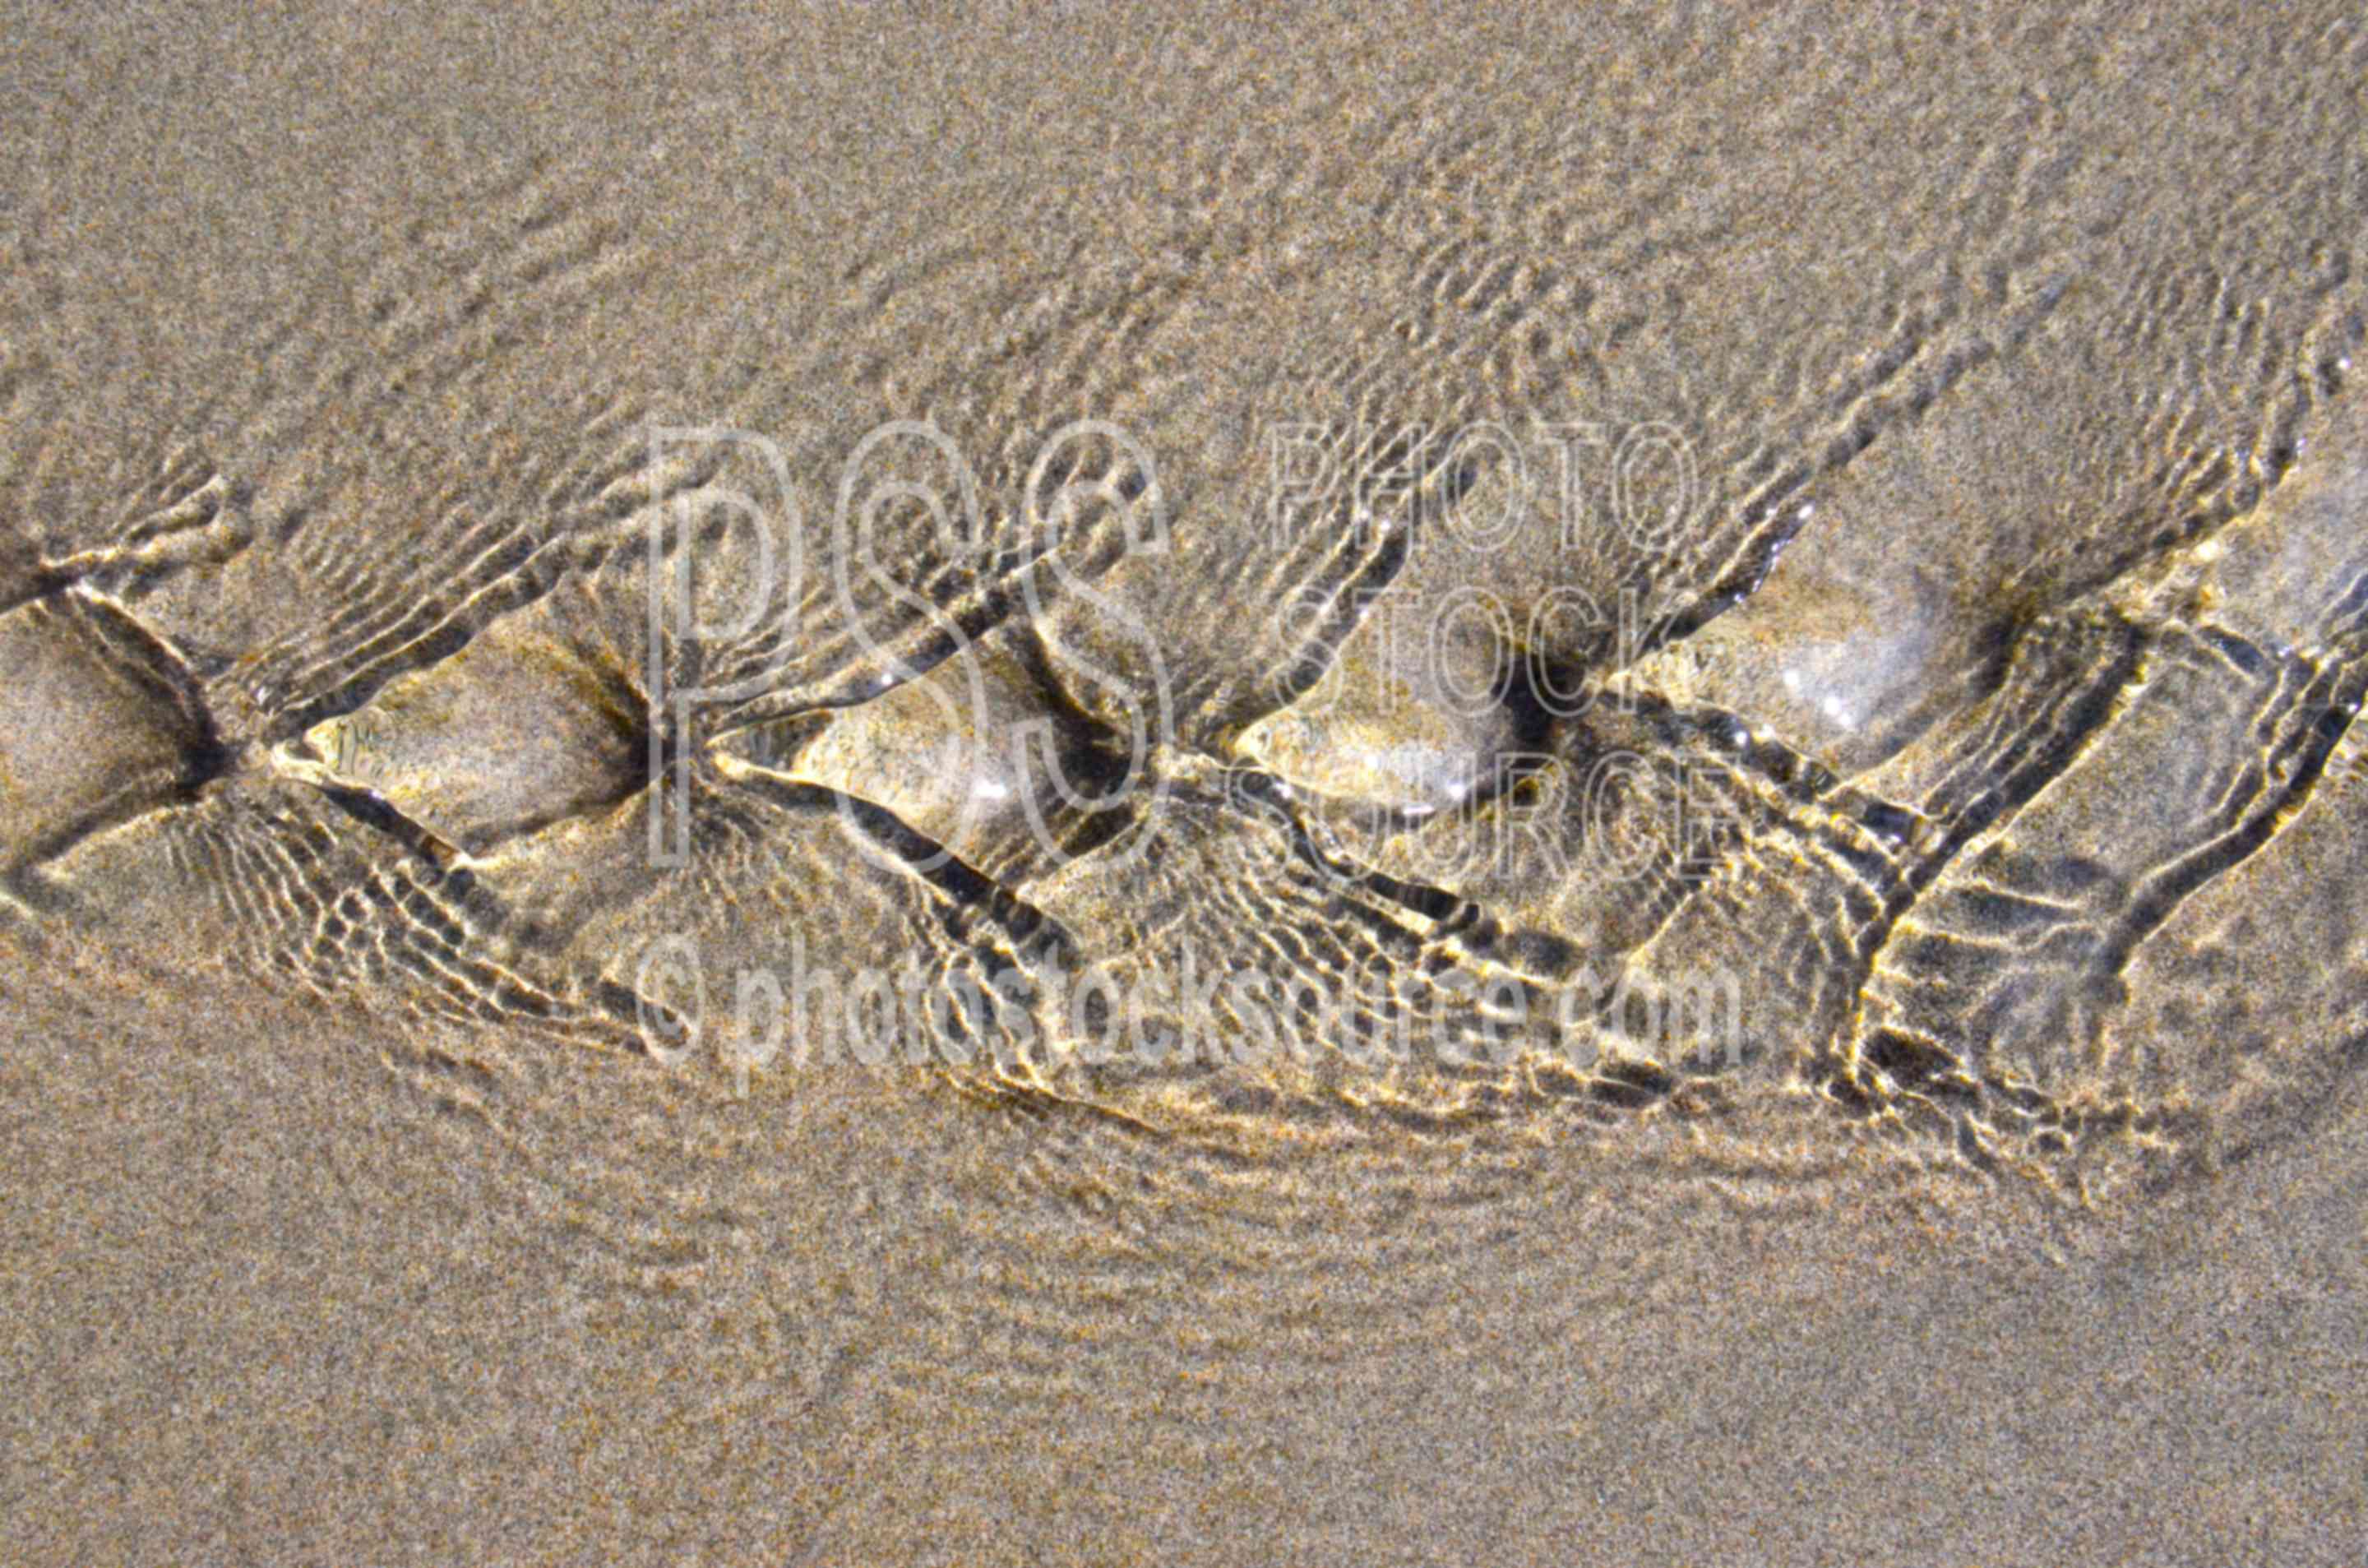 Ripples in Water on the Beach,light,abstract,ripples,beach,wave